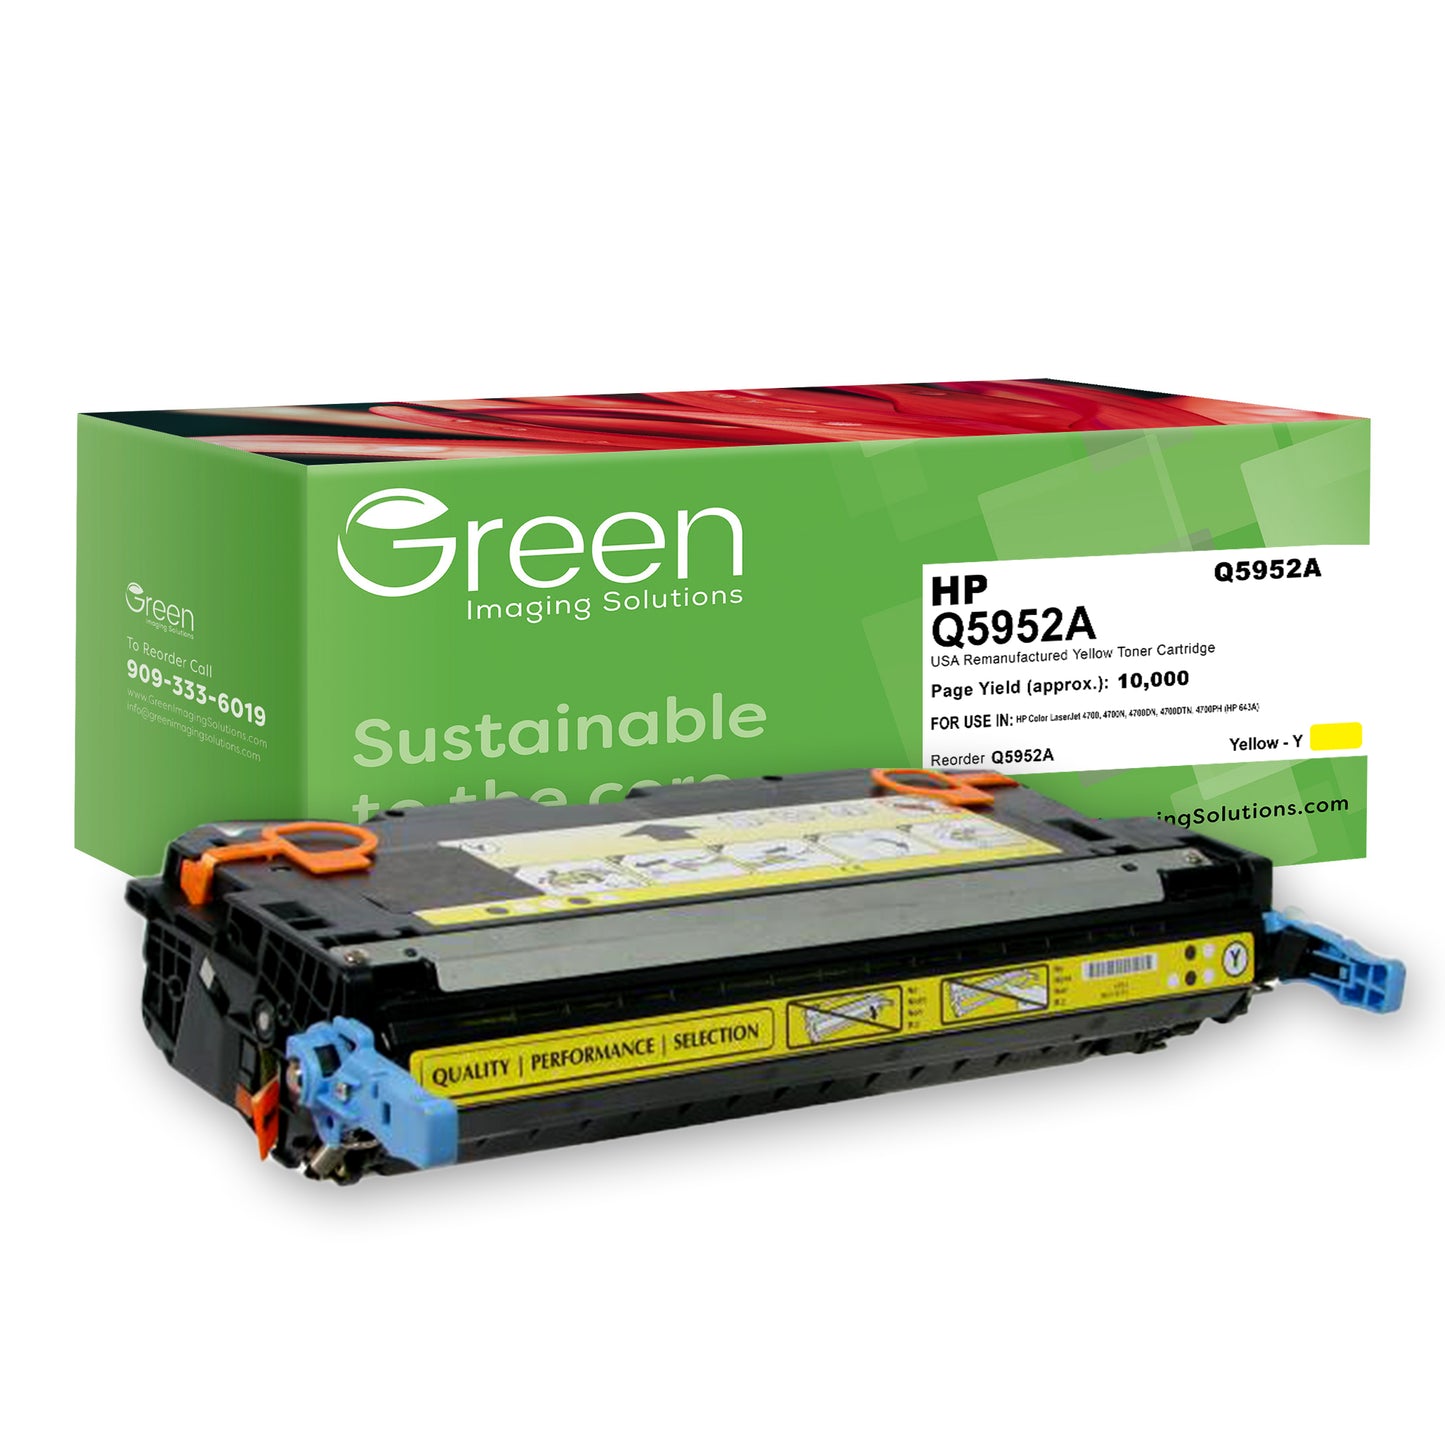 GIS USA Remanufactured Yellow Toner Cartridge for HP Q5952A (HP 643A)